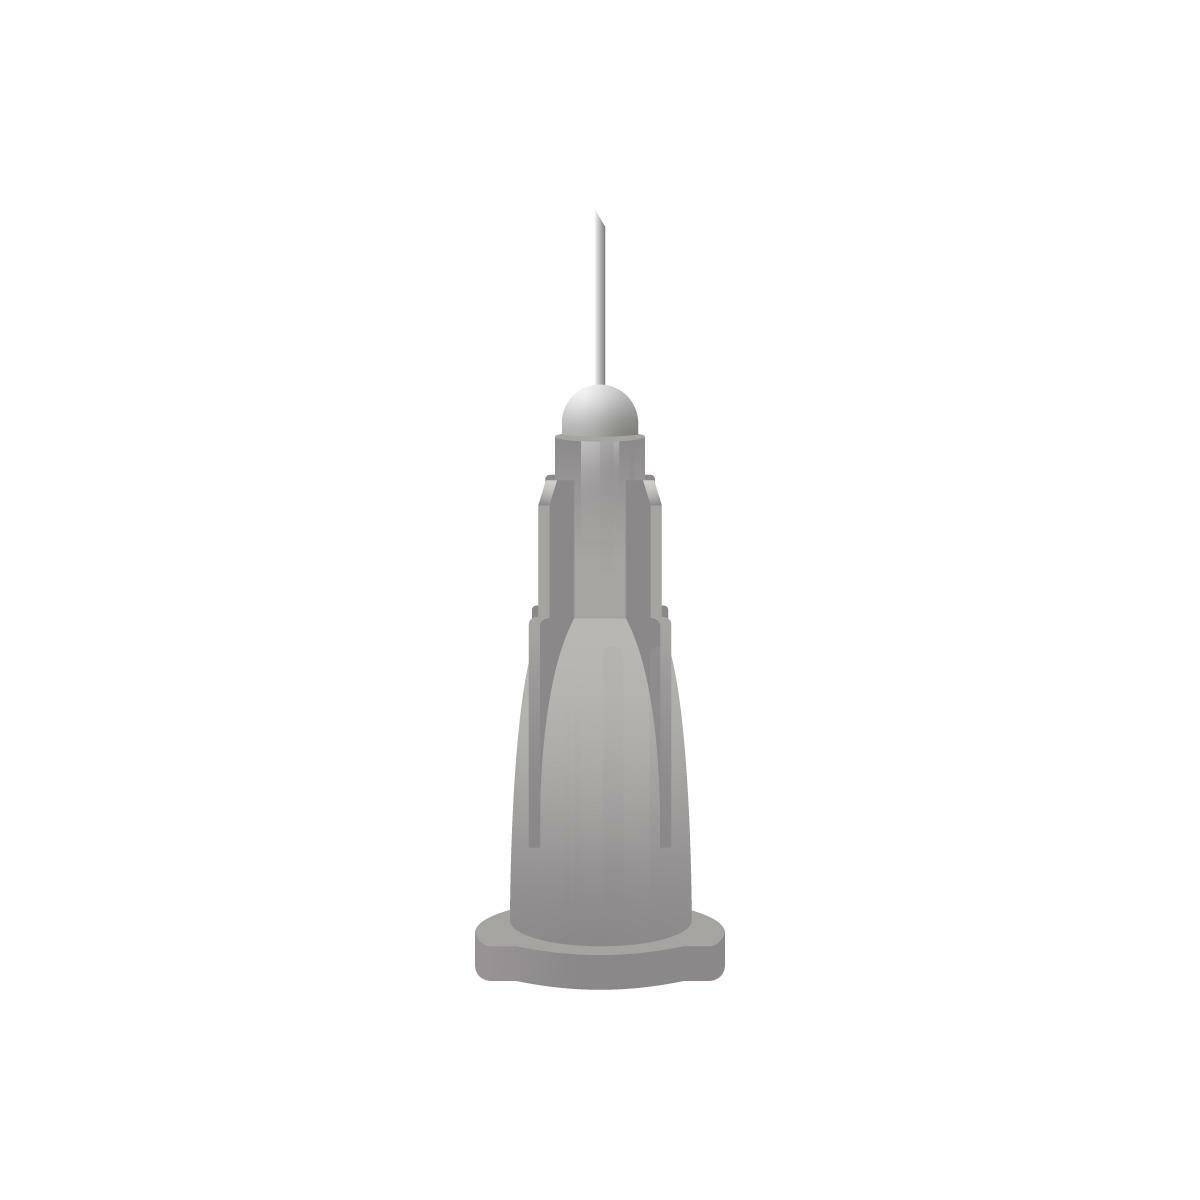 27g Grey 6mm Meso-relle Mesotherapy Needle